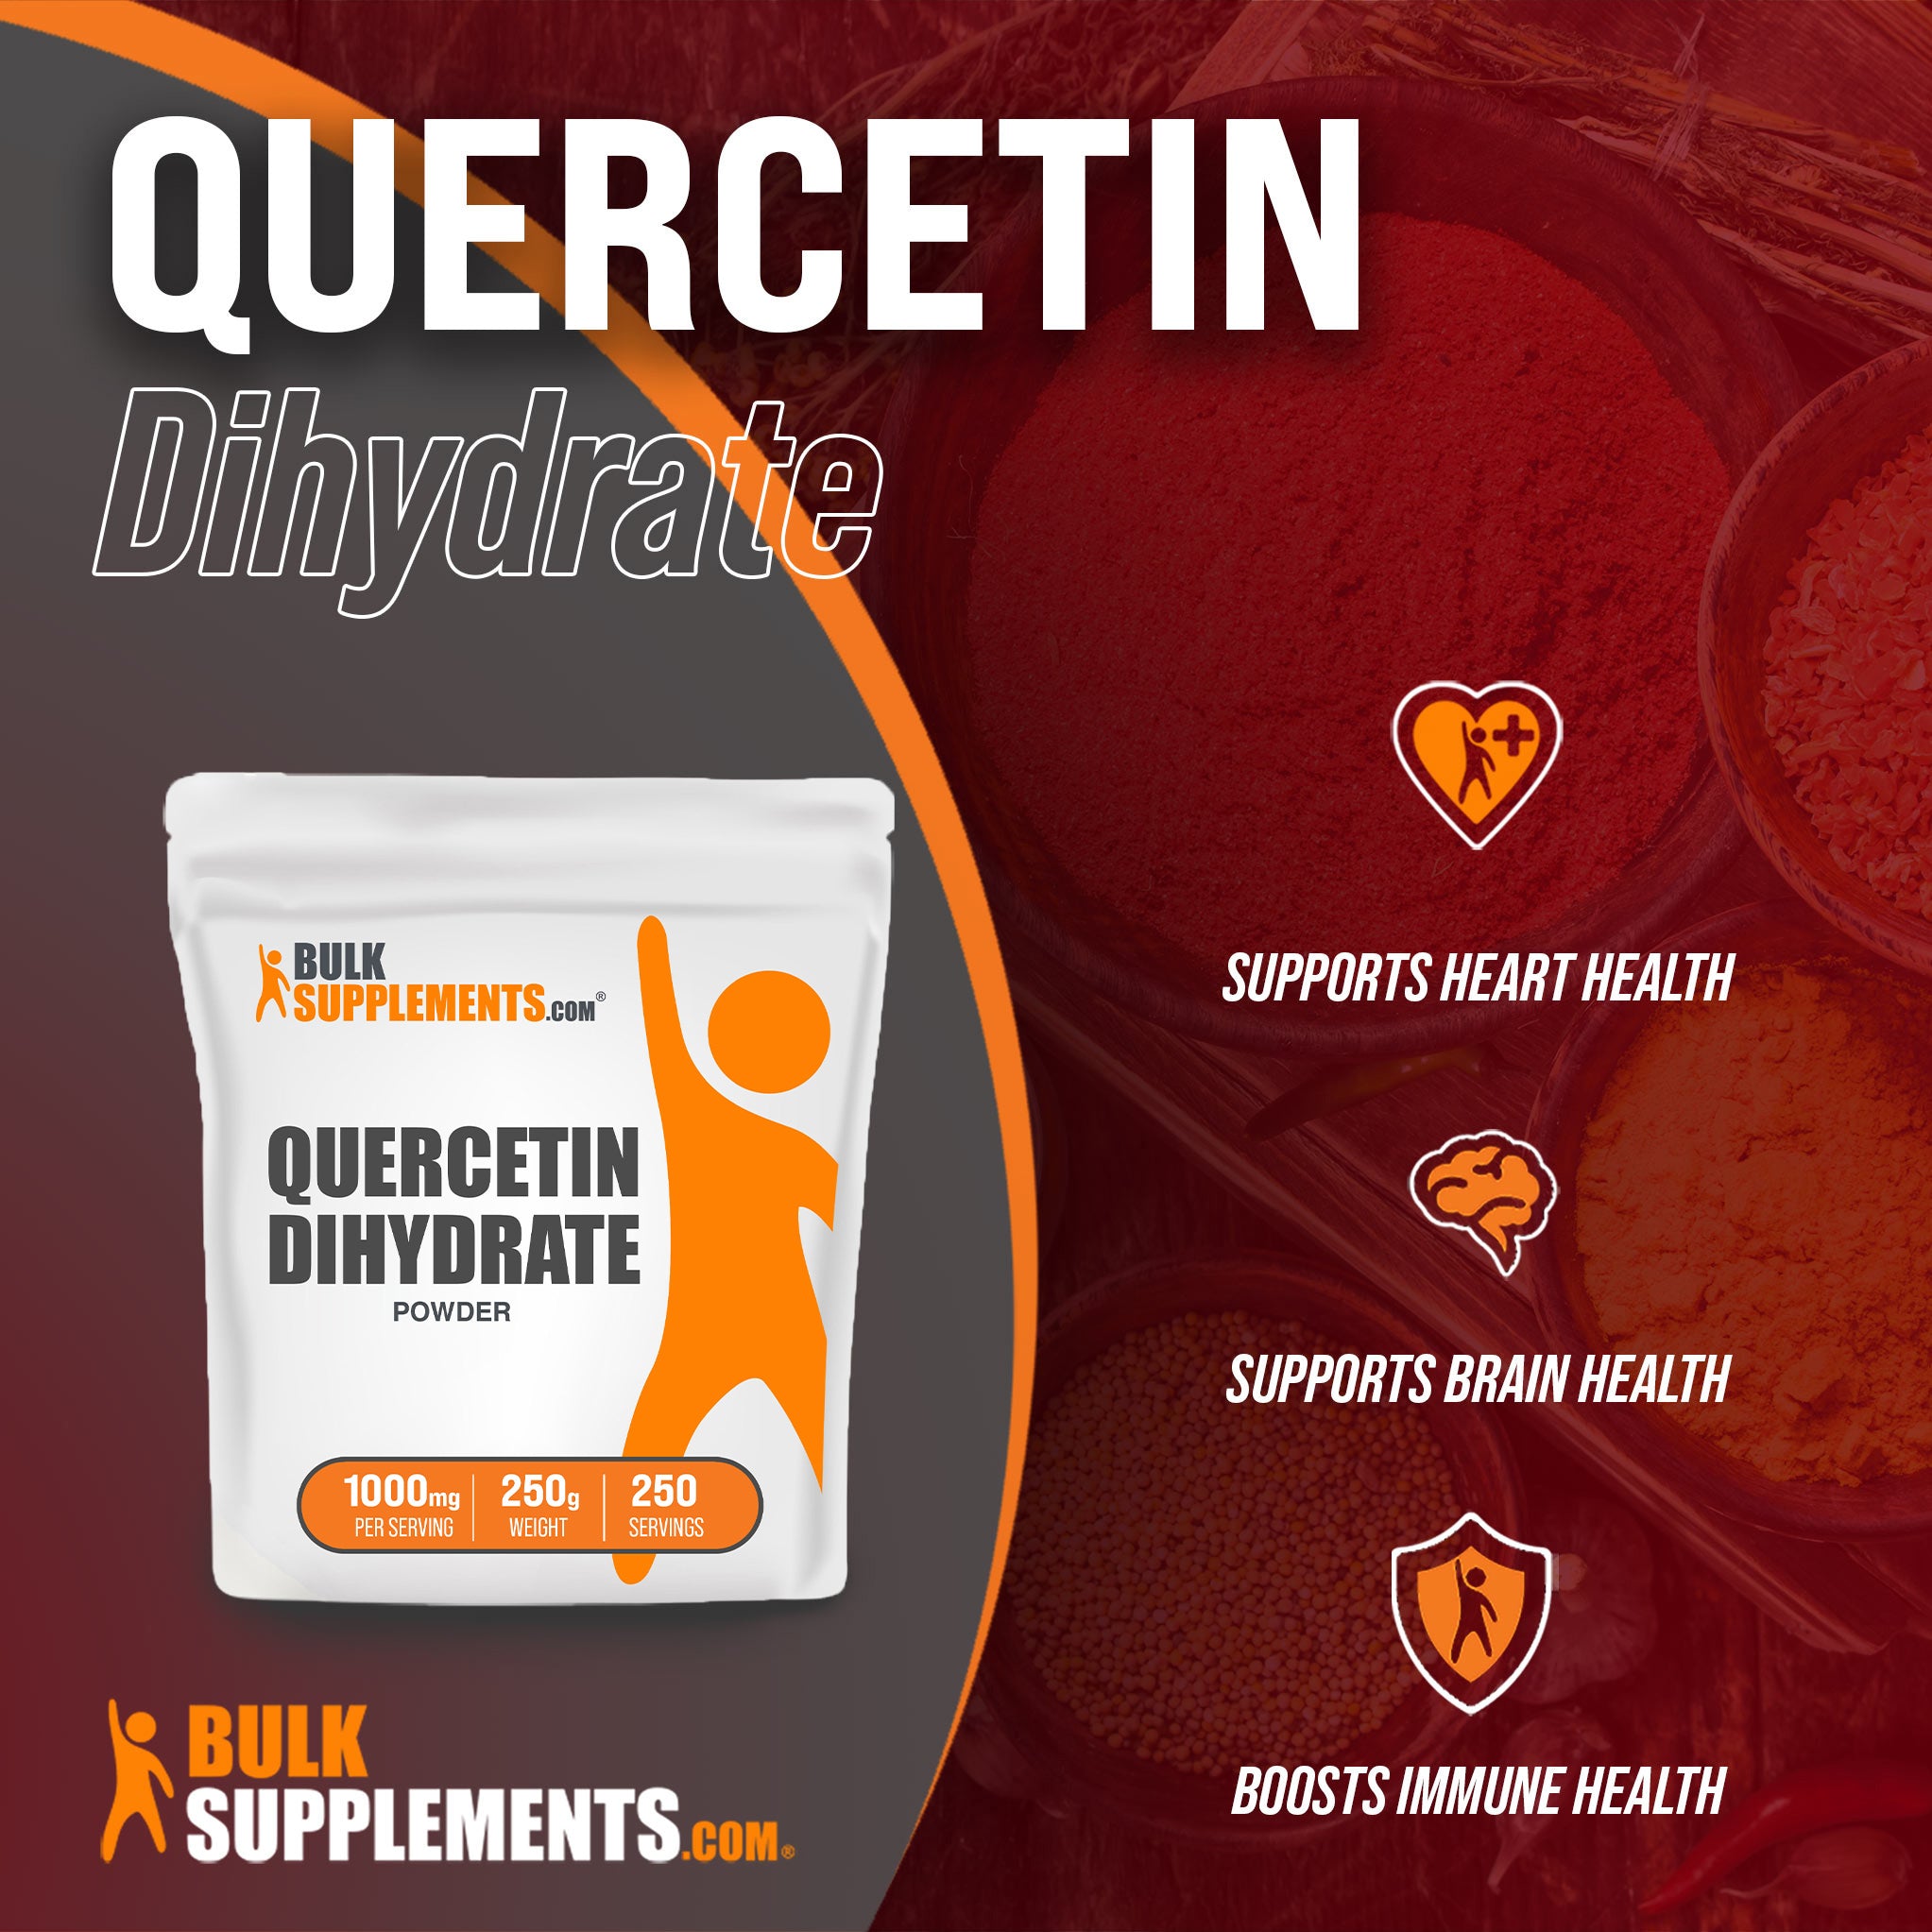 Benefits of Quercetin Dihydrate: supports heart health, supports brain health, boosts immune health